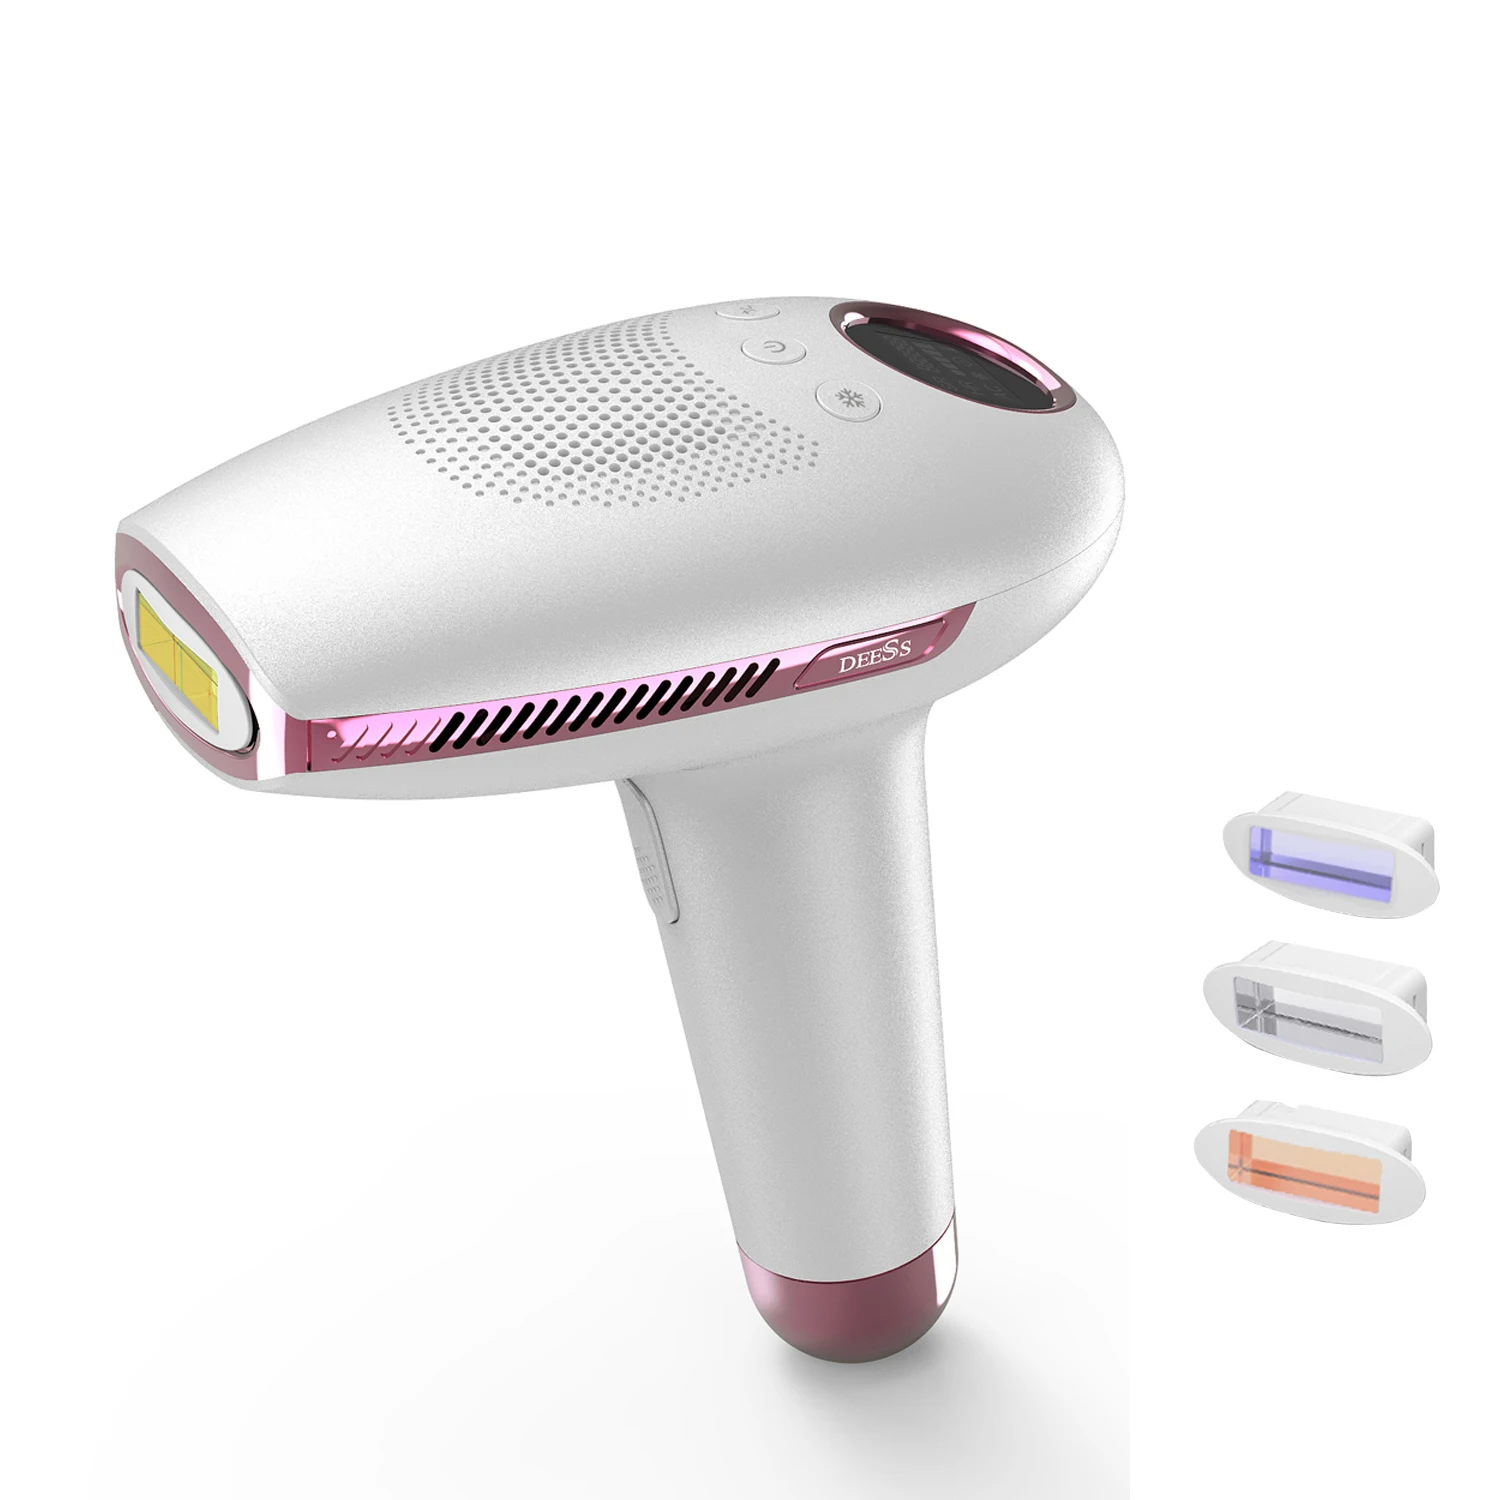 

Free shipping DEESS NEW GP591 Ice cooling ipl hair removal home use 3 in 1 device changeable lamps unlimited shots